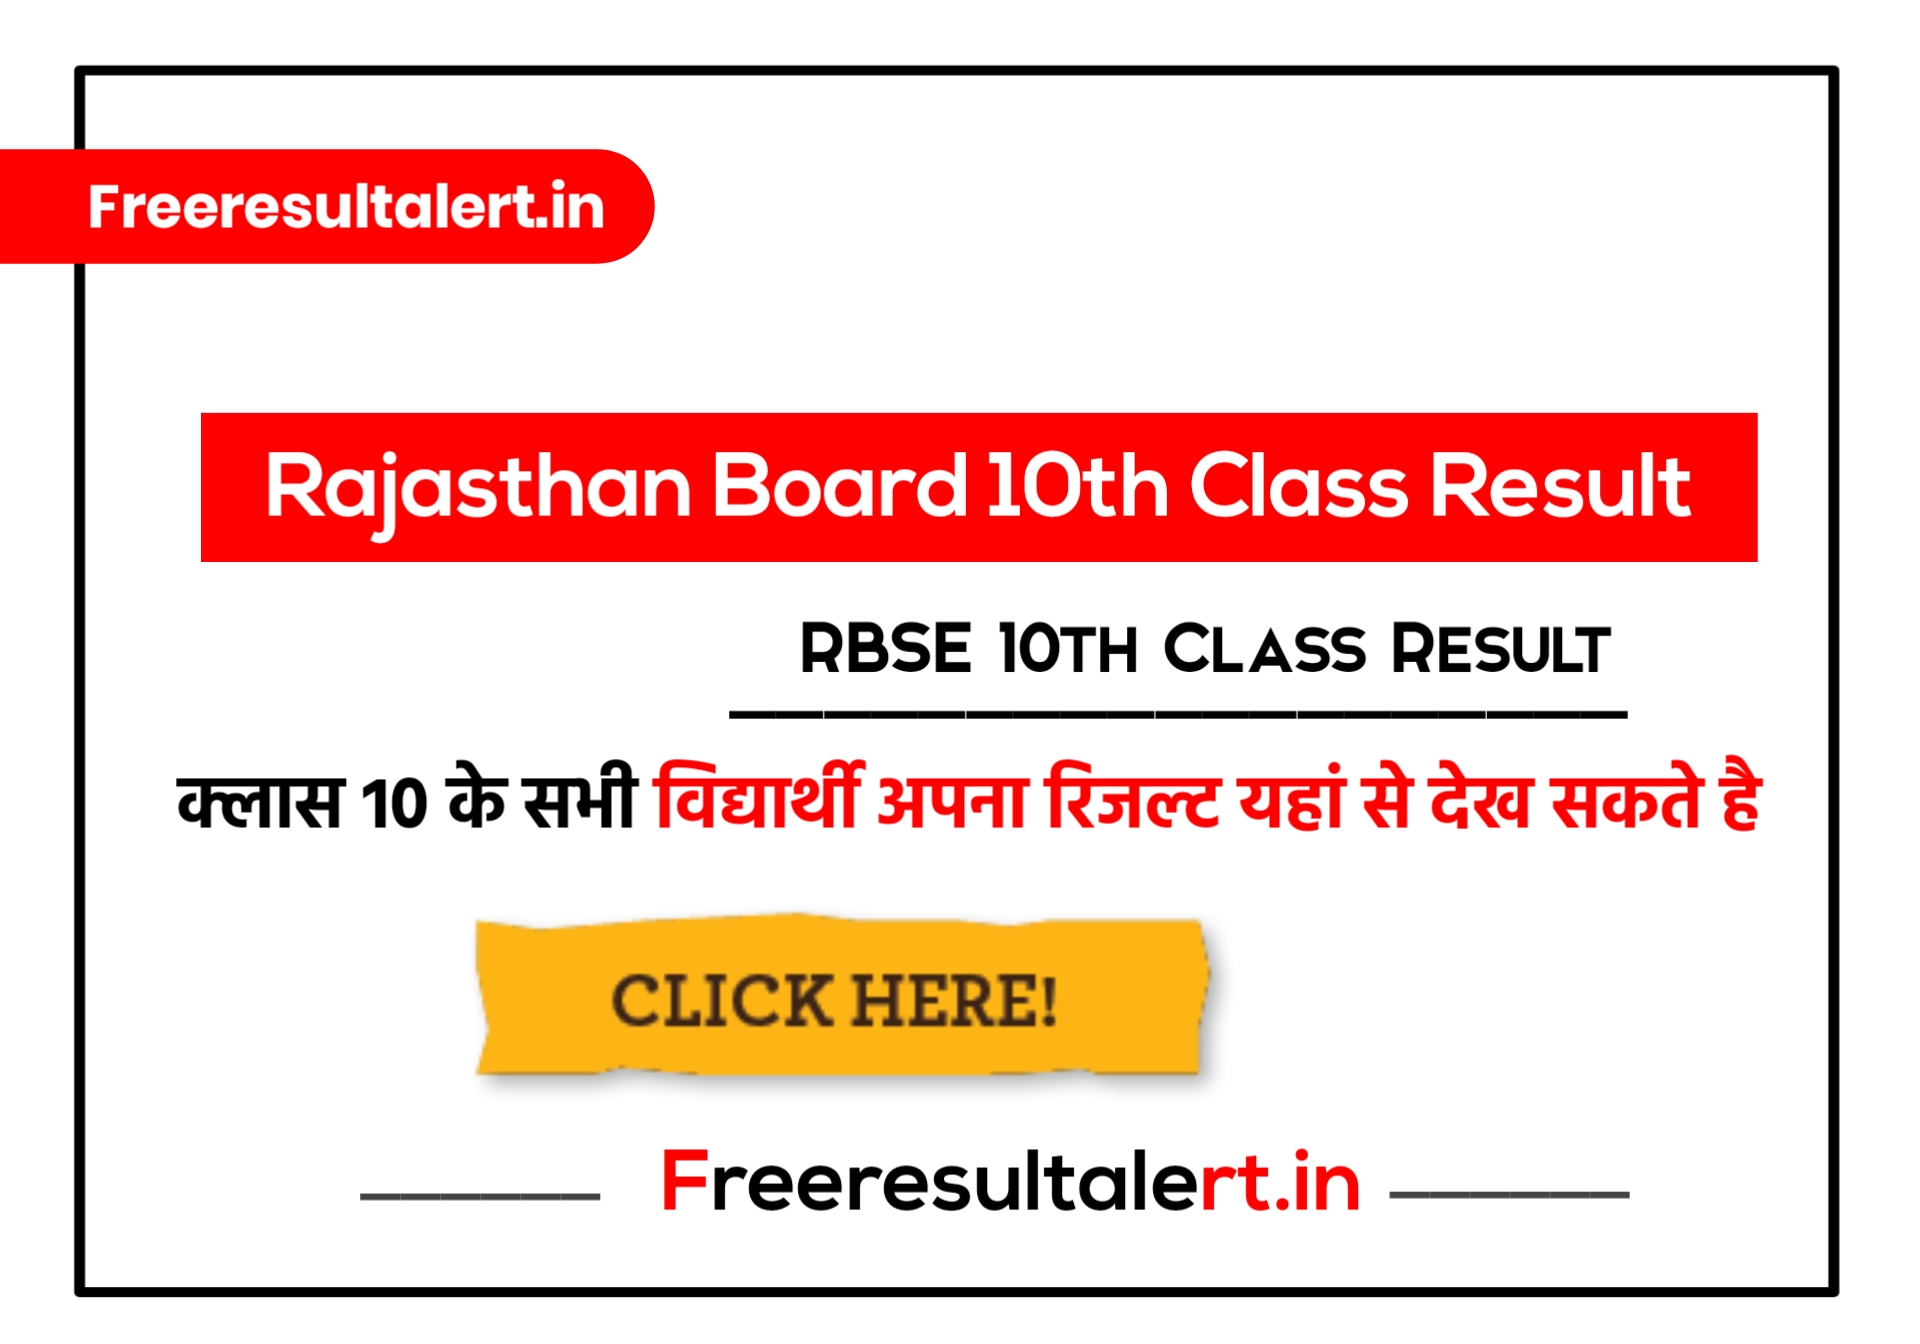 RBSE 10th Class Result 2020